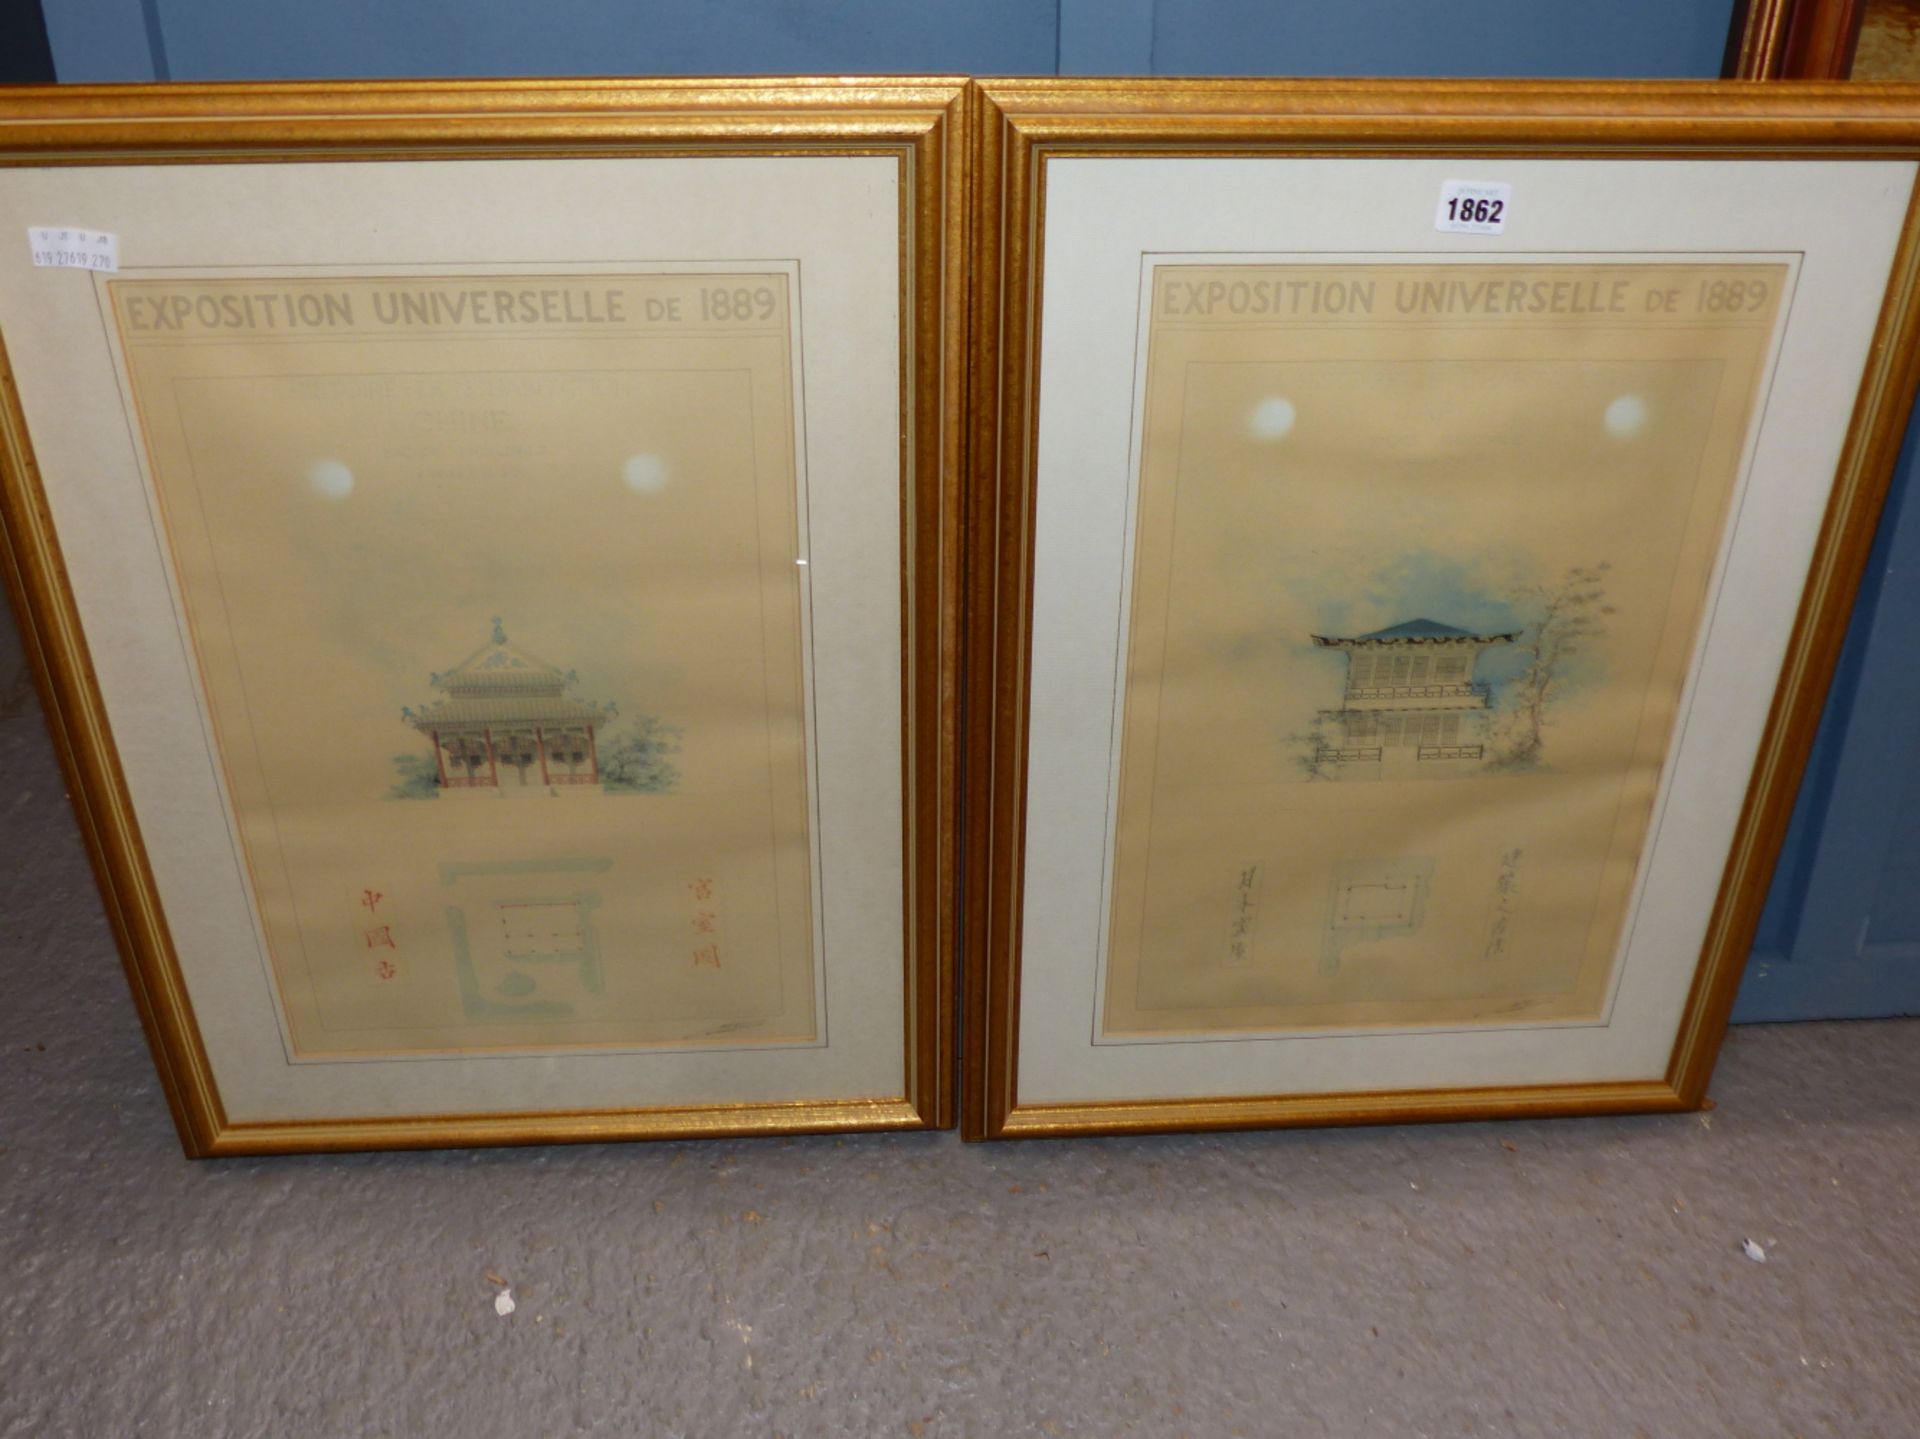 TWO PRINTS OF POSTERS FROM THE EXPOSITION UNIVERSELLE DE 1889, SHOWING THE HOUSE STYLES OF CHINA AND - Image 4 of 4